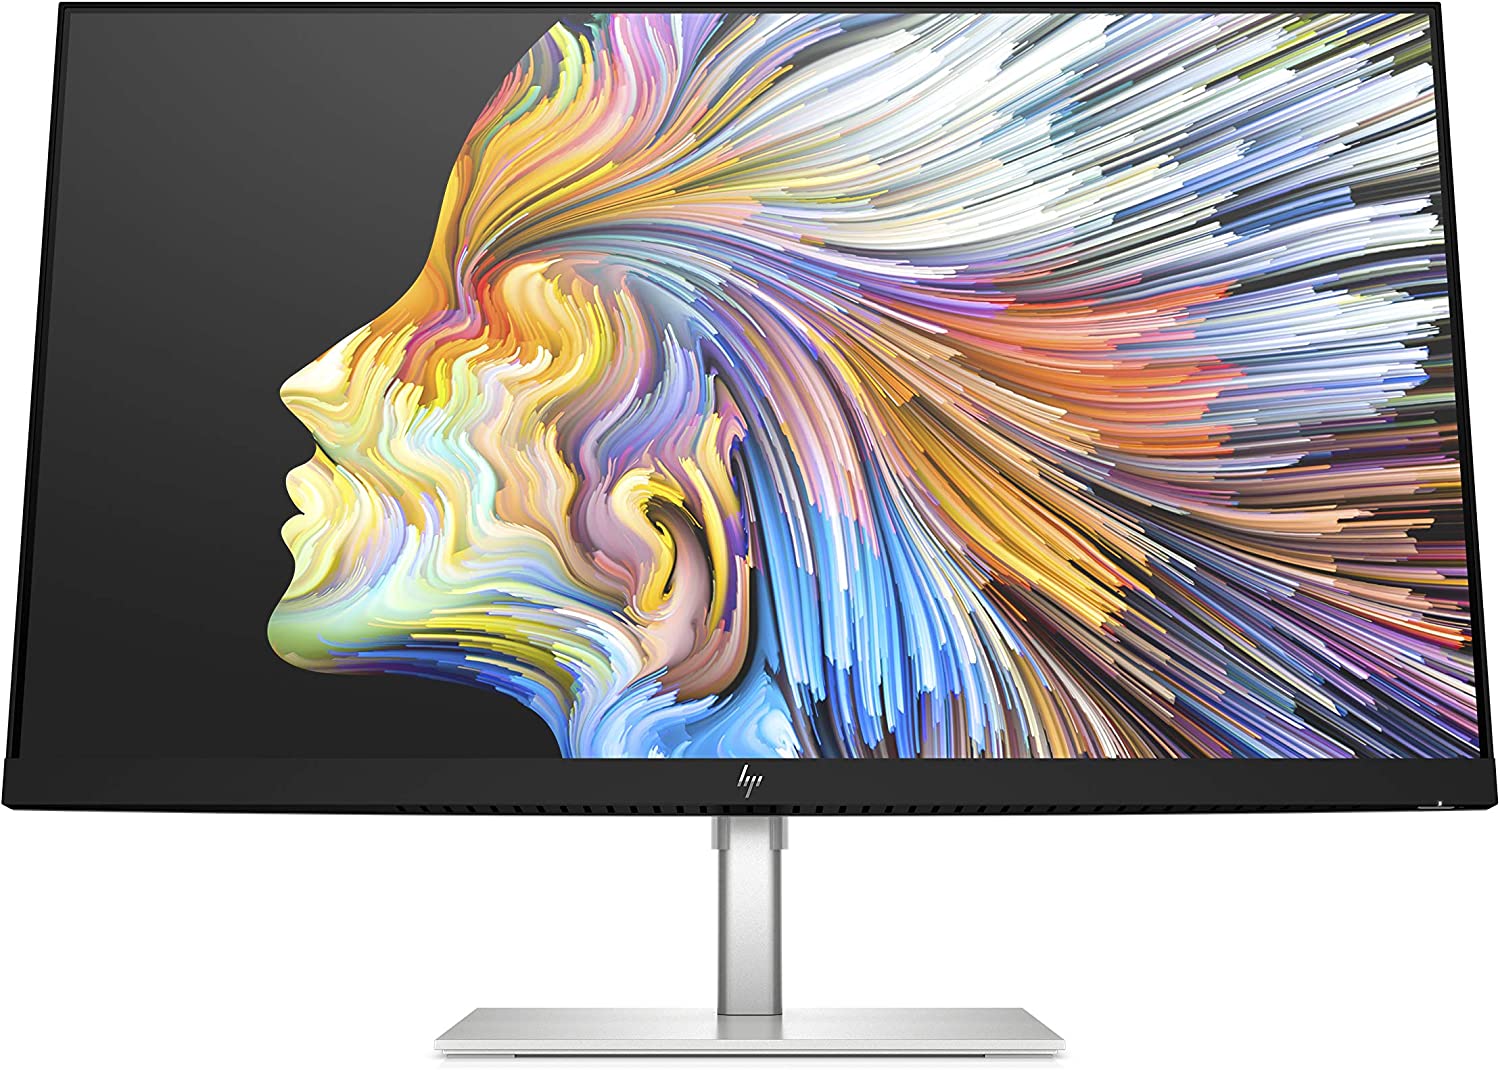 4k monitor for graphic design review